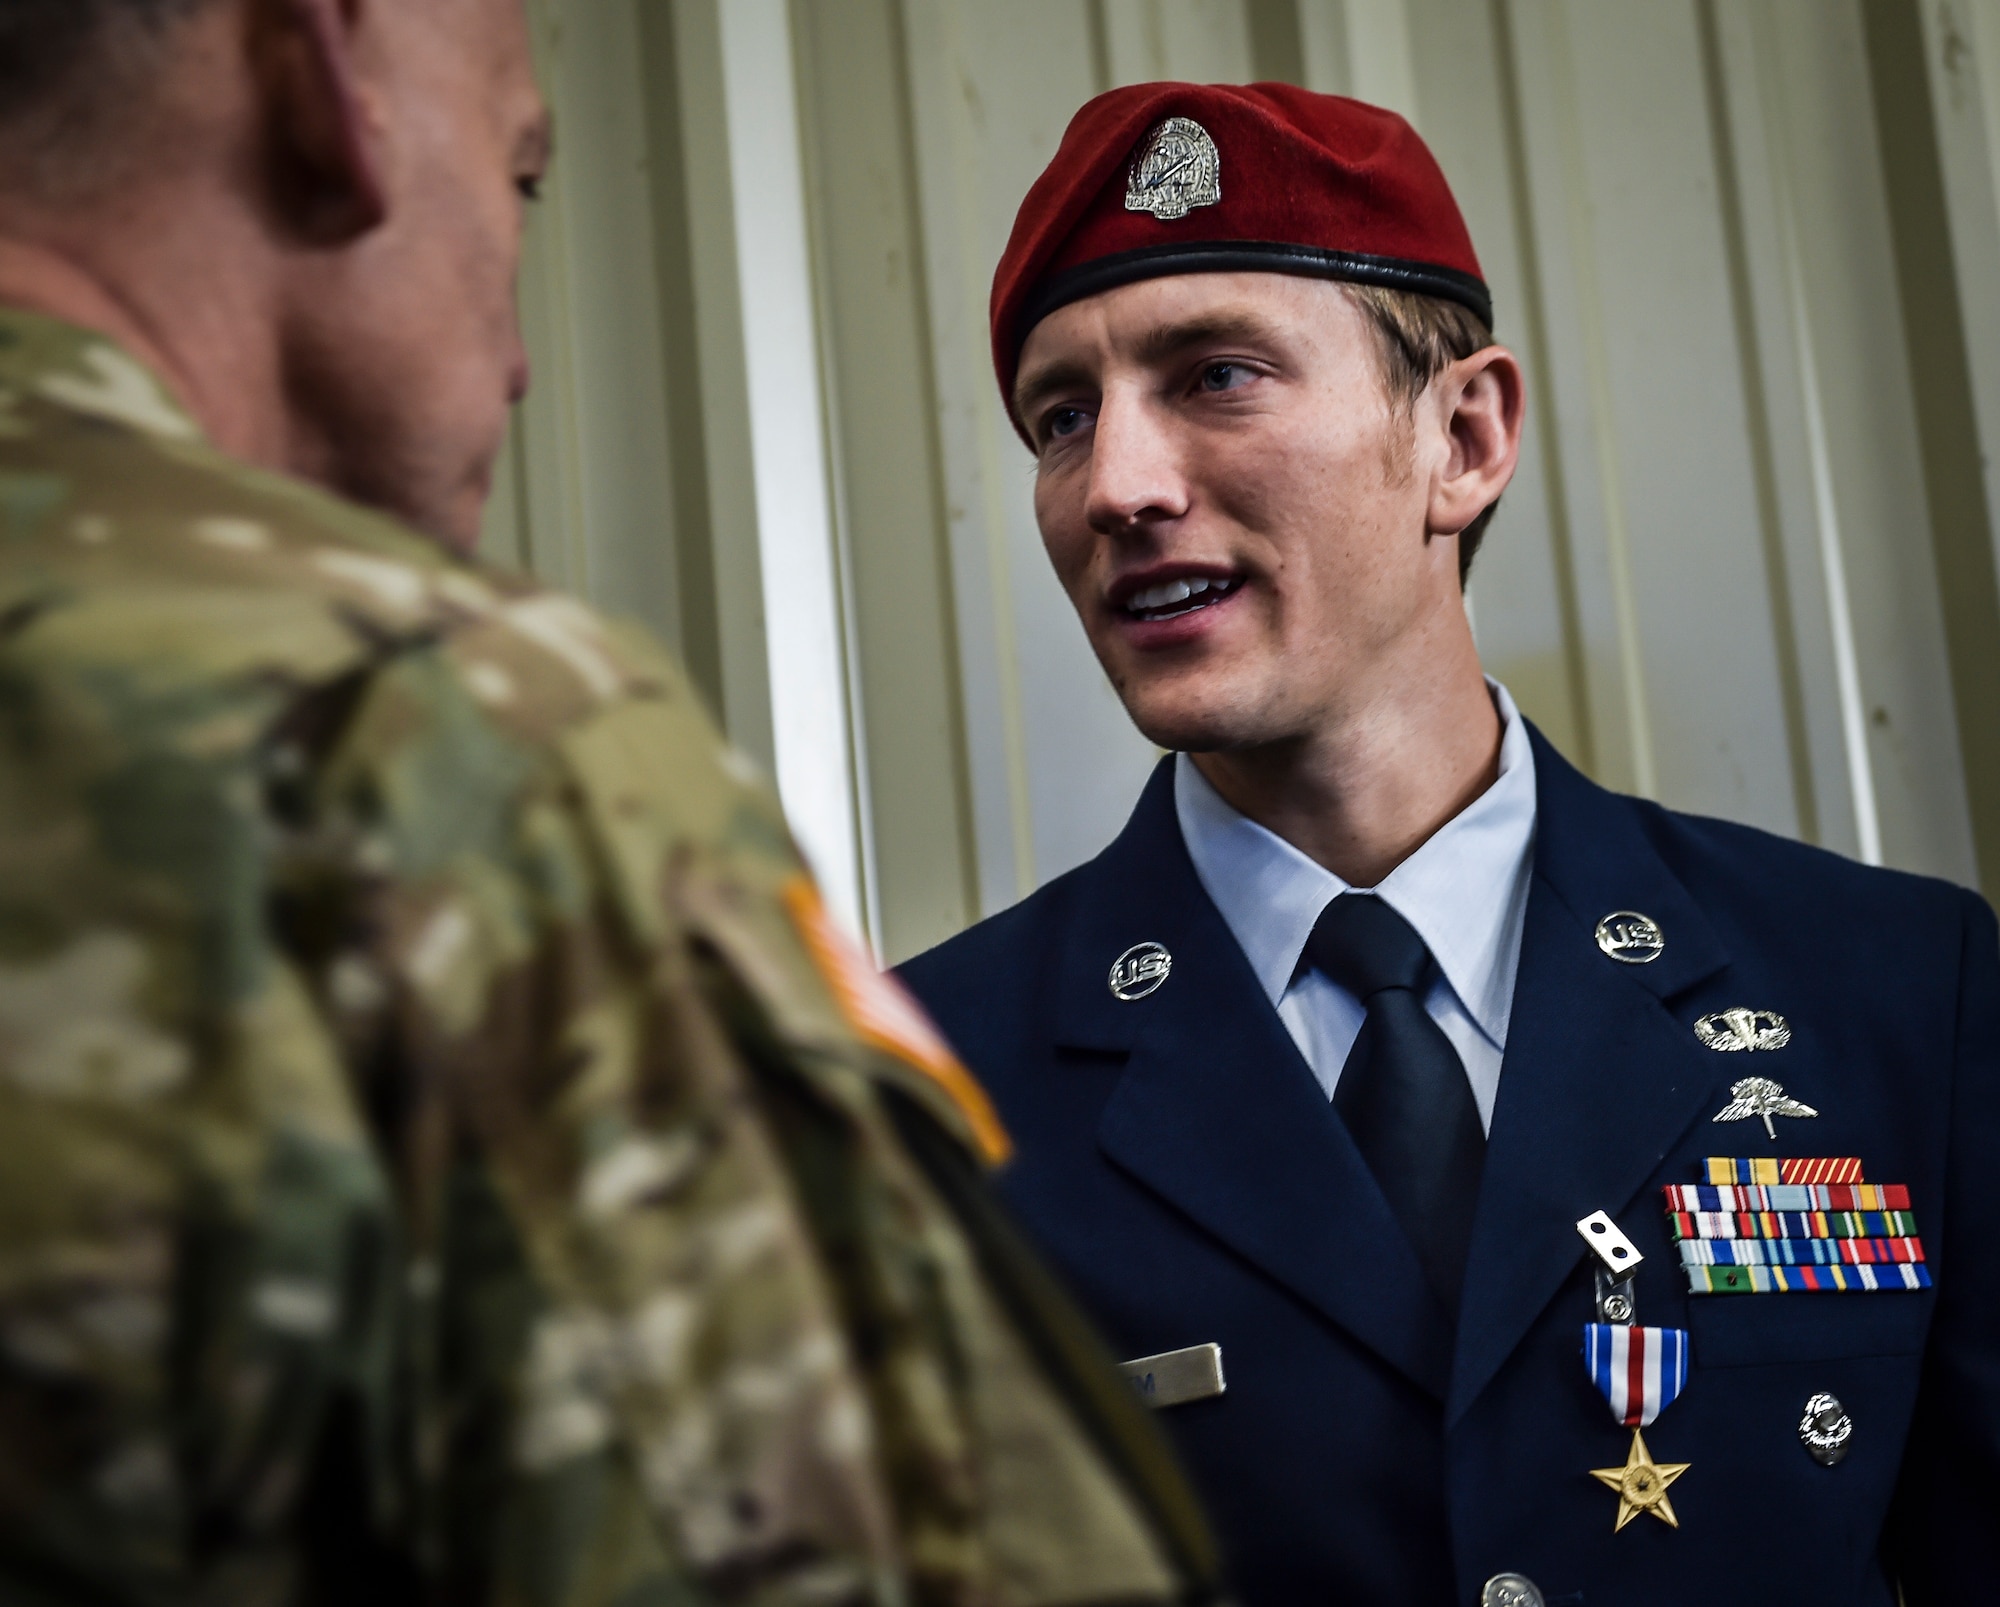 Staff Sgt. Keaton Thiem, a combat controller with the 22nd Special Tactics Squadron, shakes hands with visitors following his Silver Star Medal presentation ceremony at Joint Base Lewis-McChord, Wash., Nov. 16, 2016. Thiem used air power to ensure the safety of his 100-plus man SOF element during a 14-hour firefight with no regard for his own personal safety, while deployed with U.S. Army Special Operations Forces in Afghanistan. (U.S. Air Force photo by Senior Airman Ryan Conroy) 